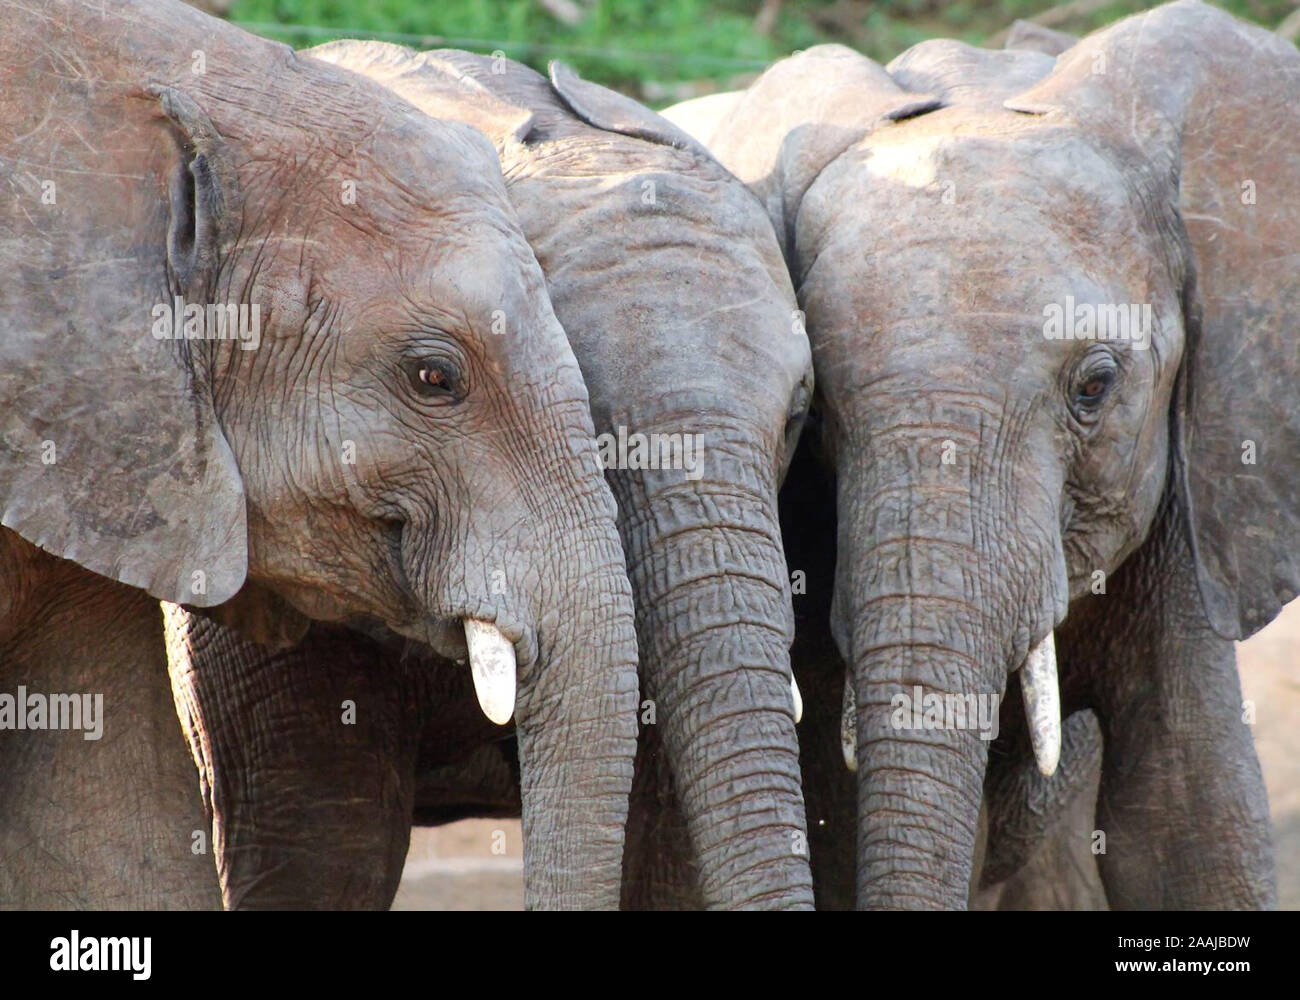 Close-up of three baby elephant orphans standing close together. (Loxodonta africana) Stock Photo